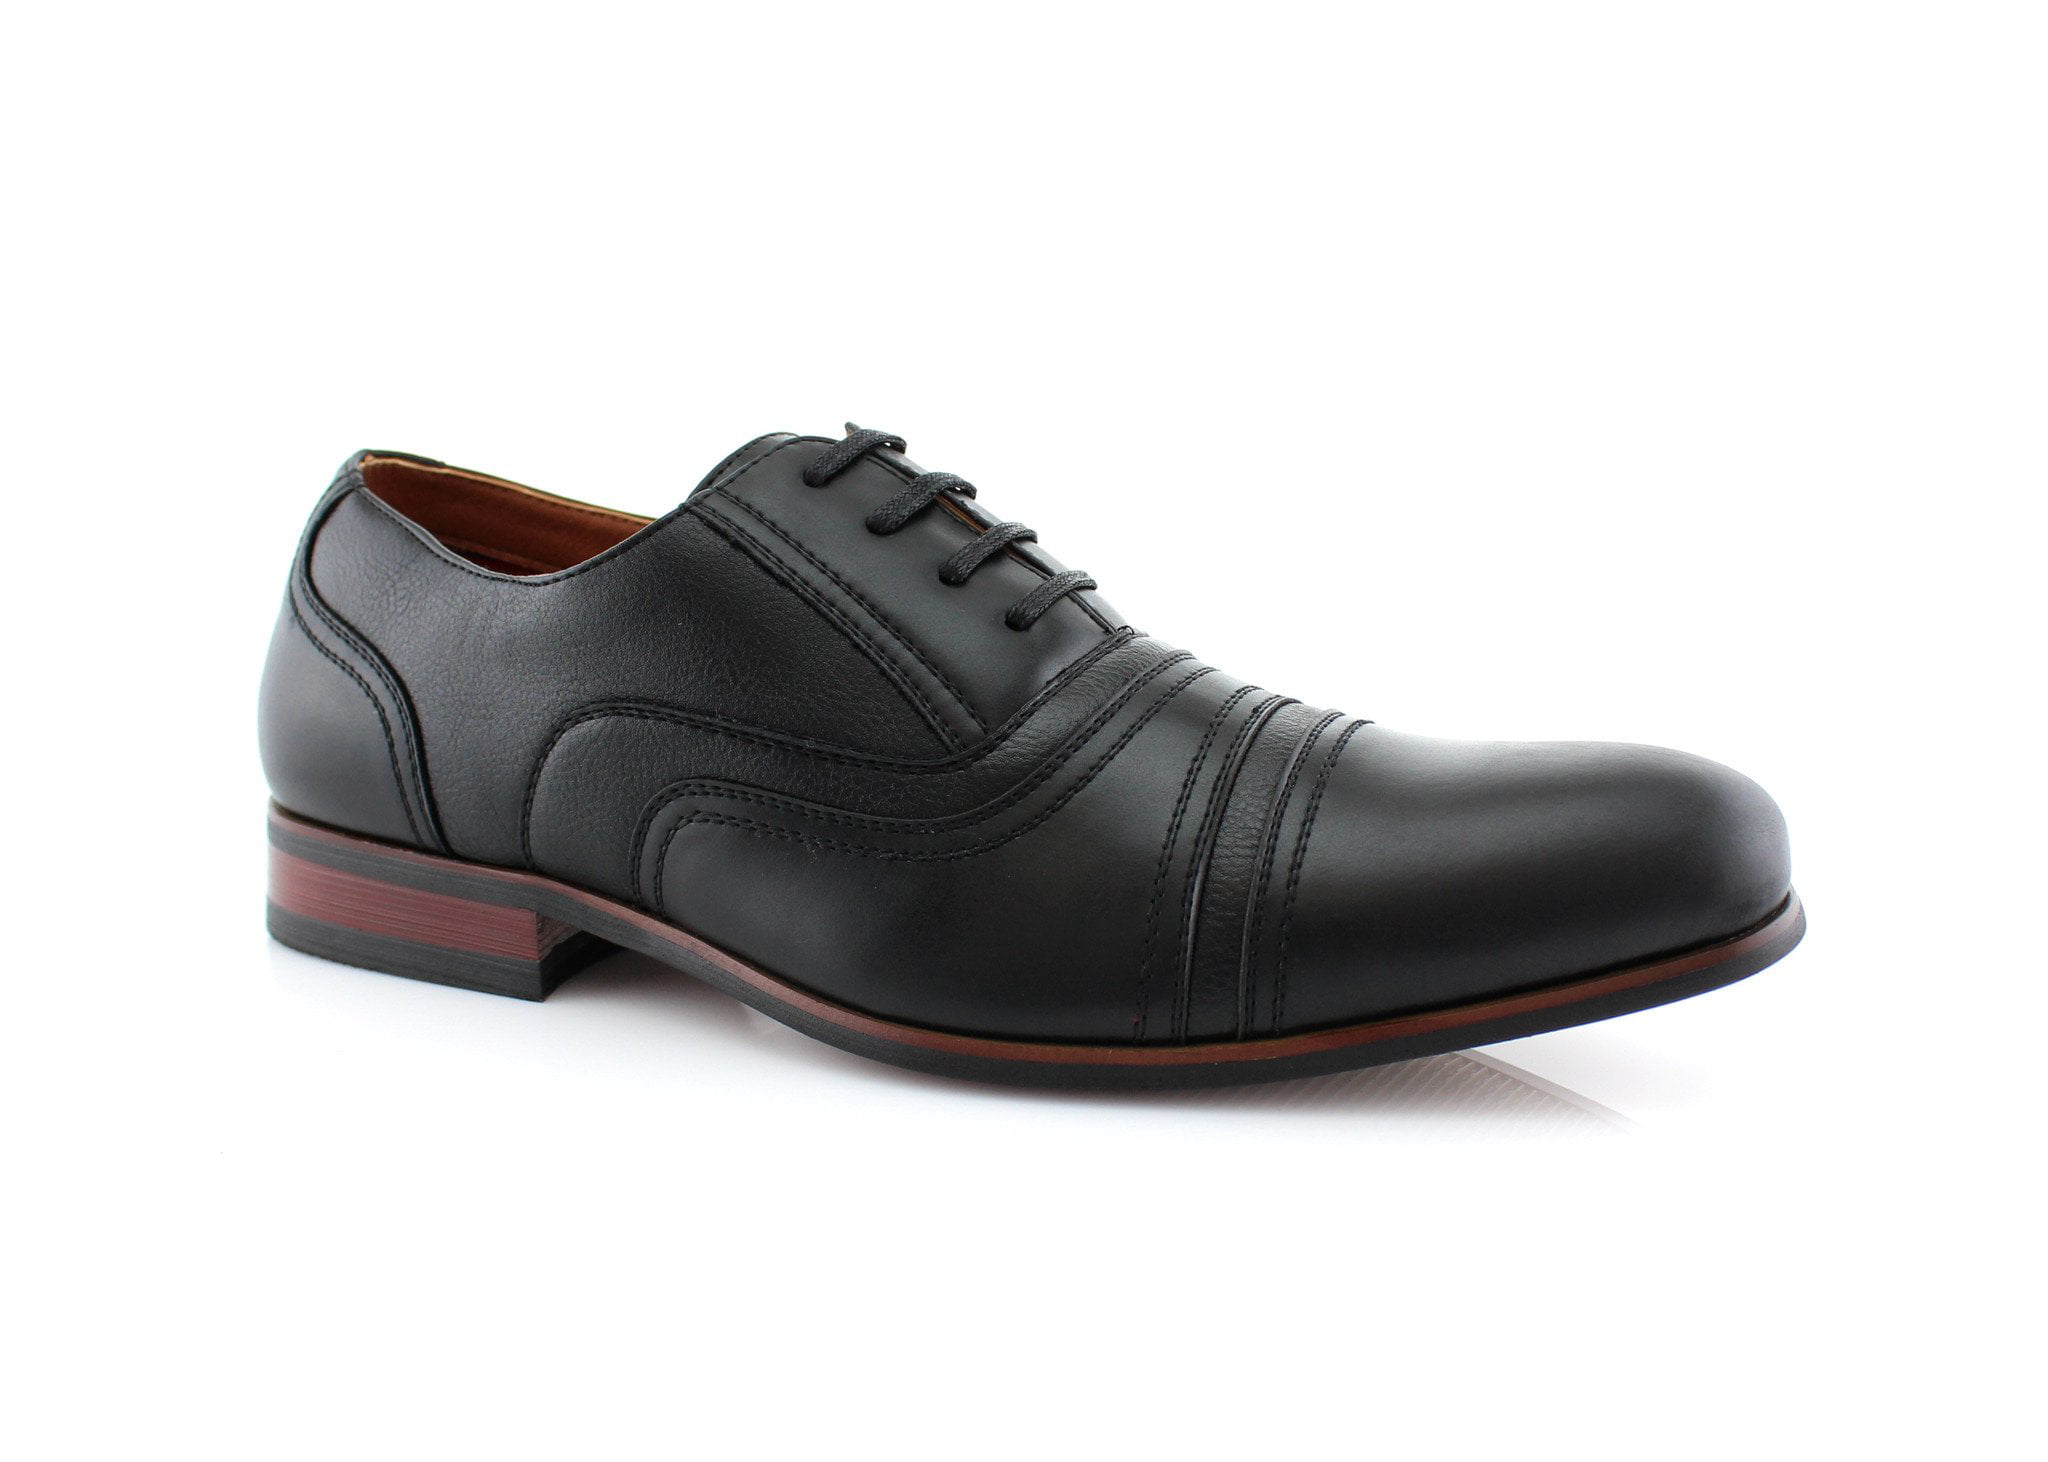 Details about   Mens Low Top Faux Leather Business Shoes Pointy Toe Oxfords Work Office Formal D 